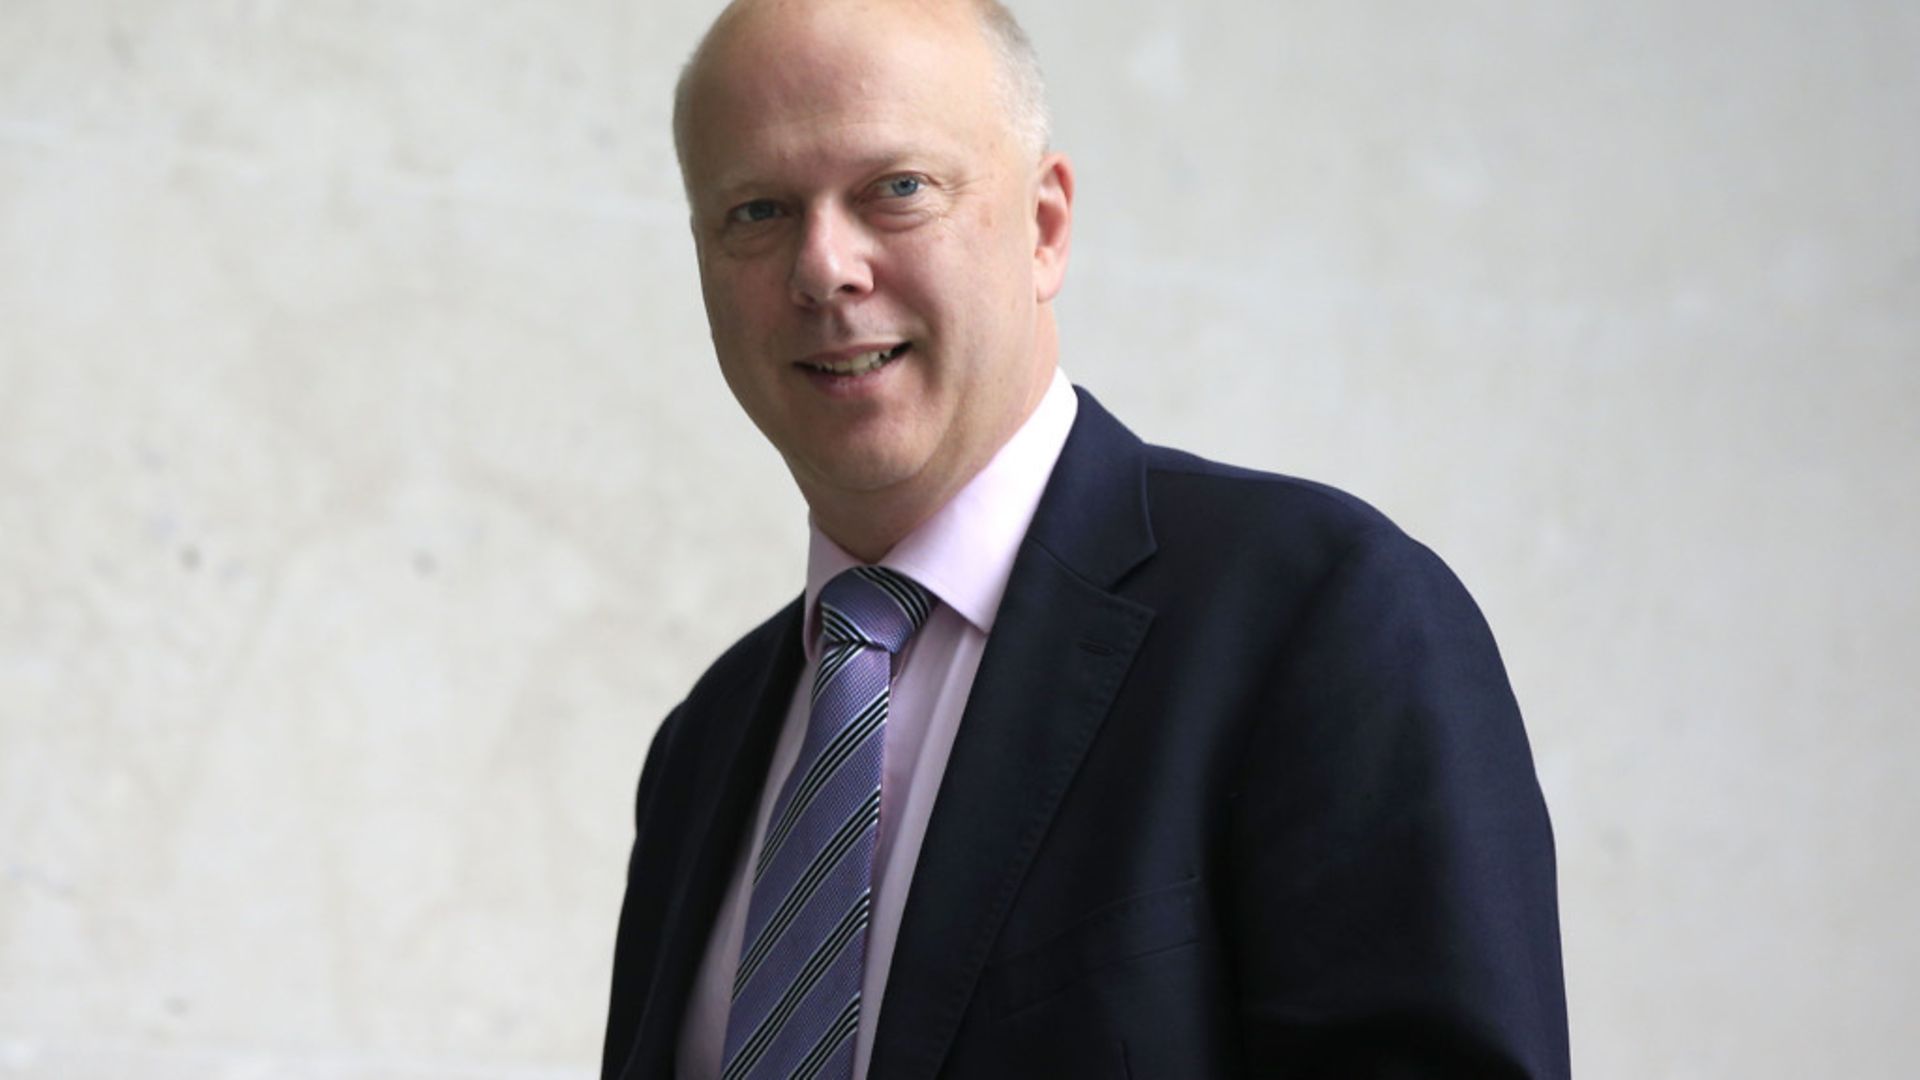 Former government minister and transport secretary Chris Grayling - Credit: PA Wire/PA Images